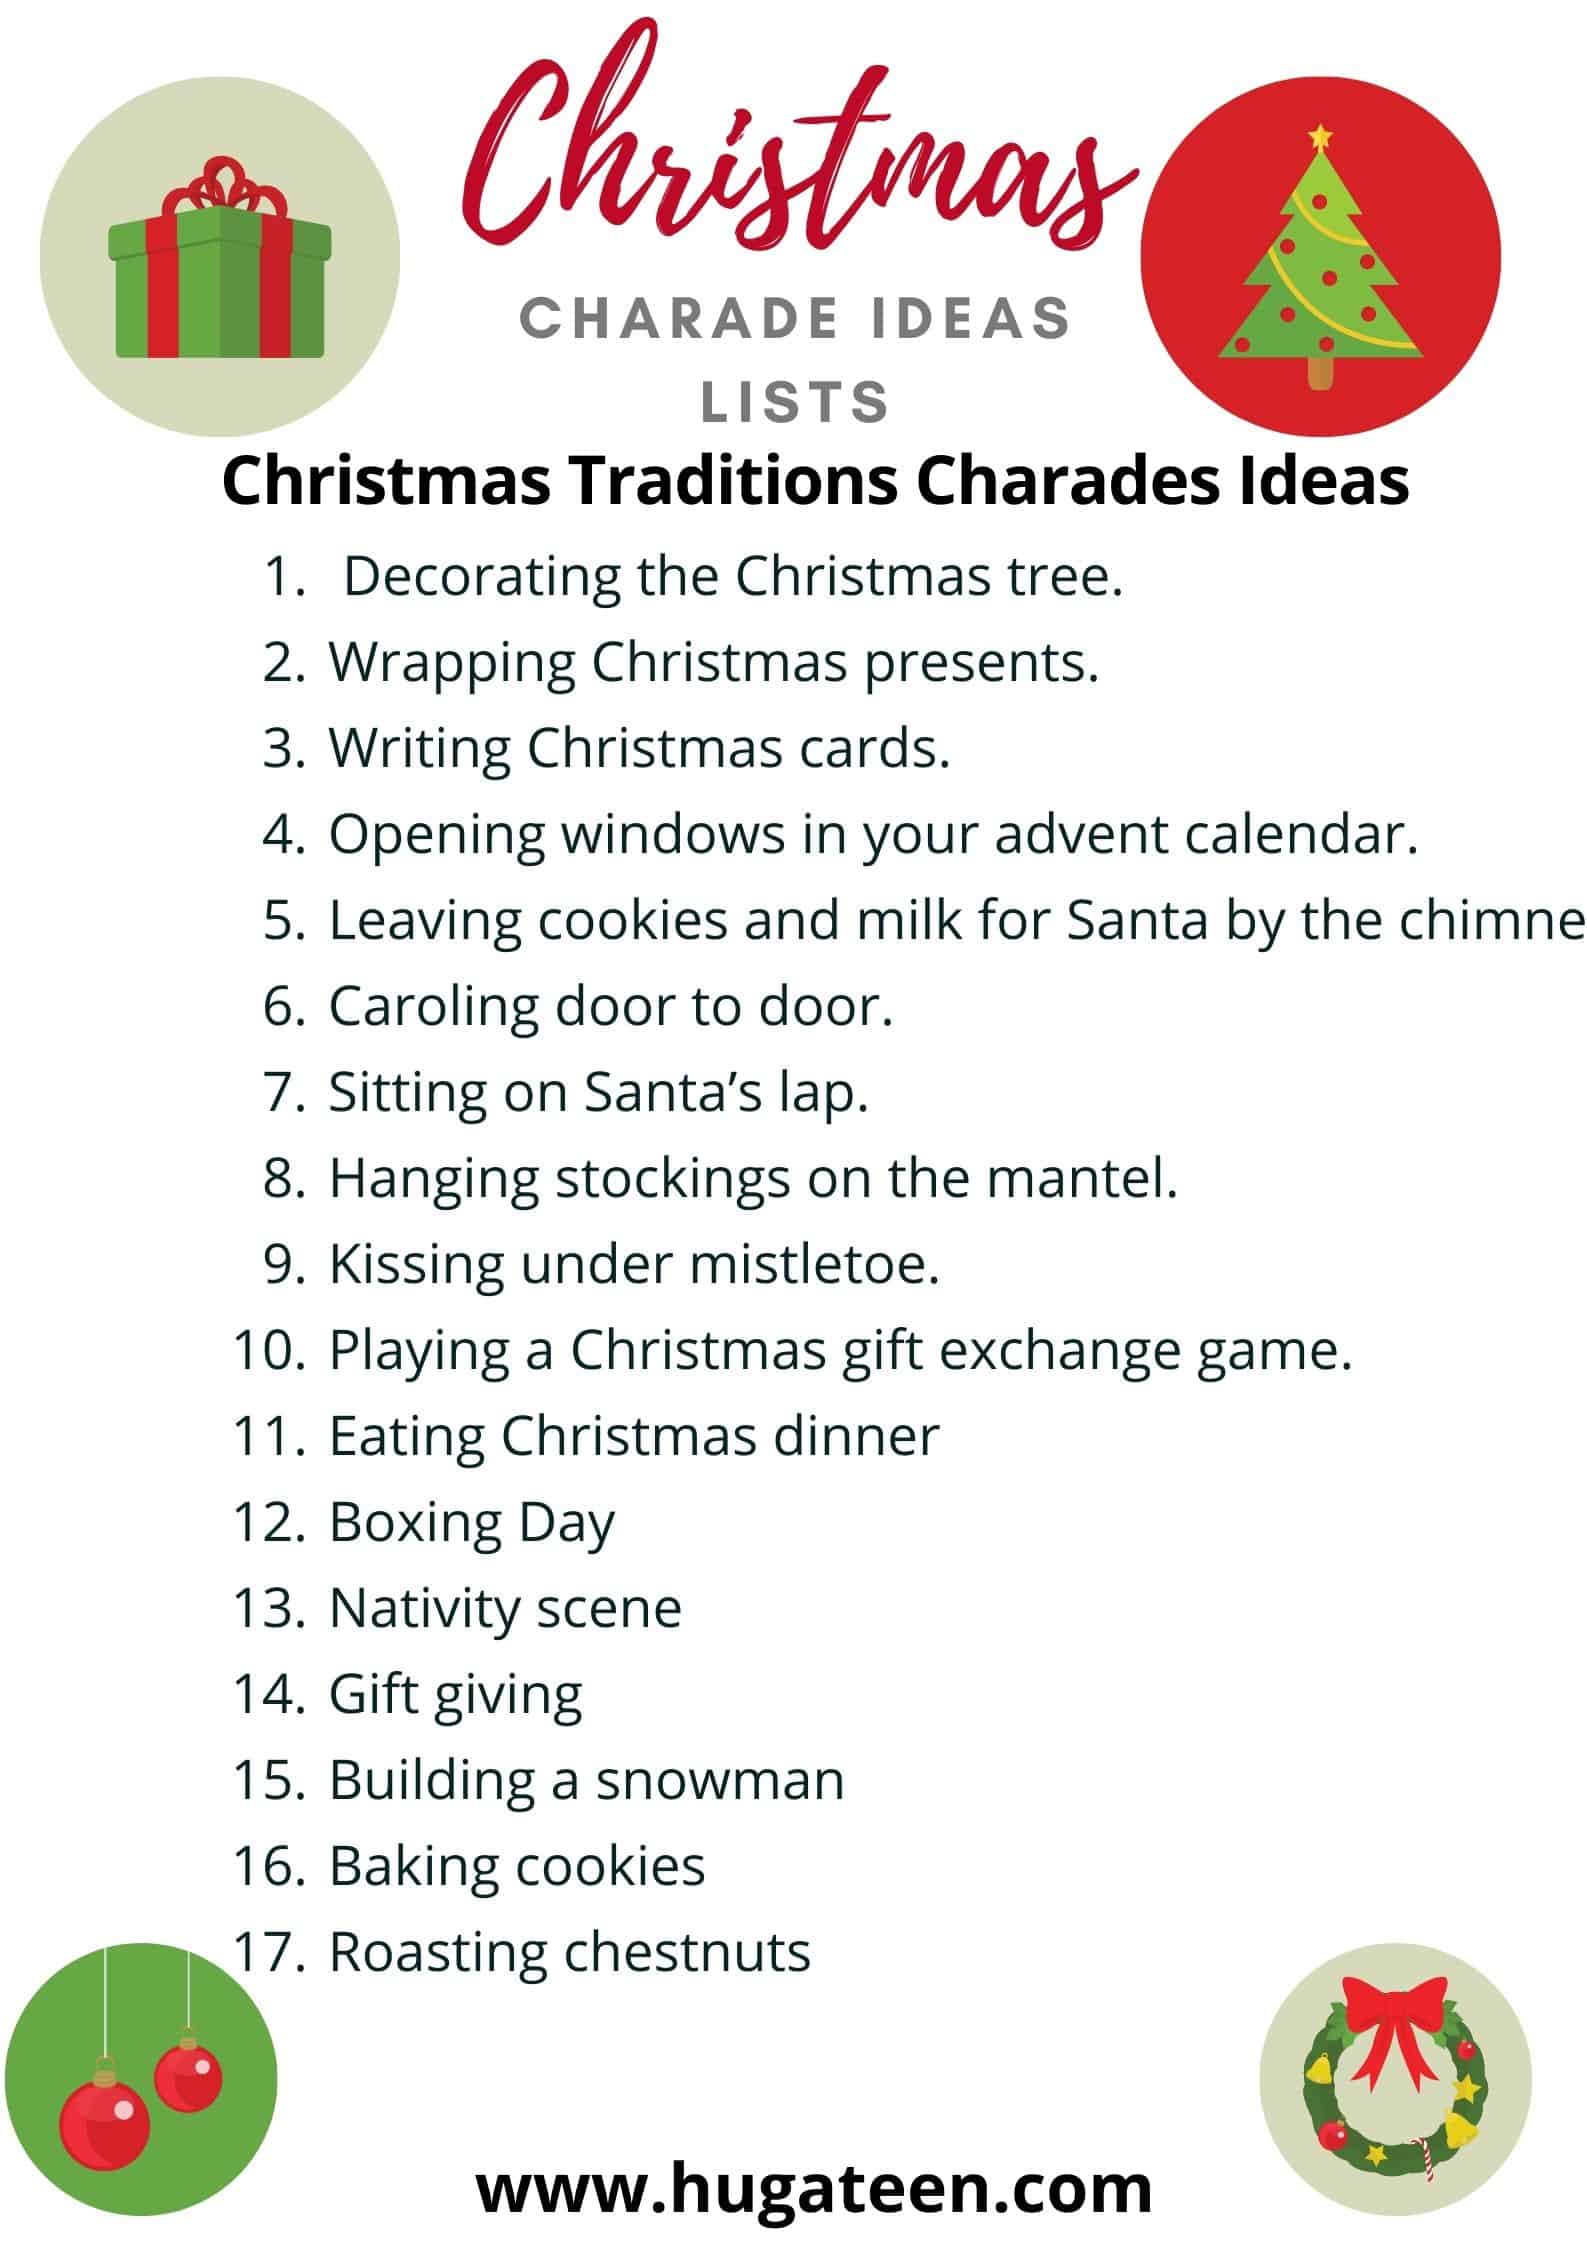 Christmas Actions or Traditions Charades Ideas